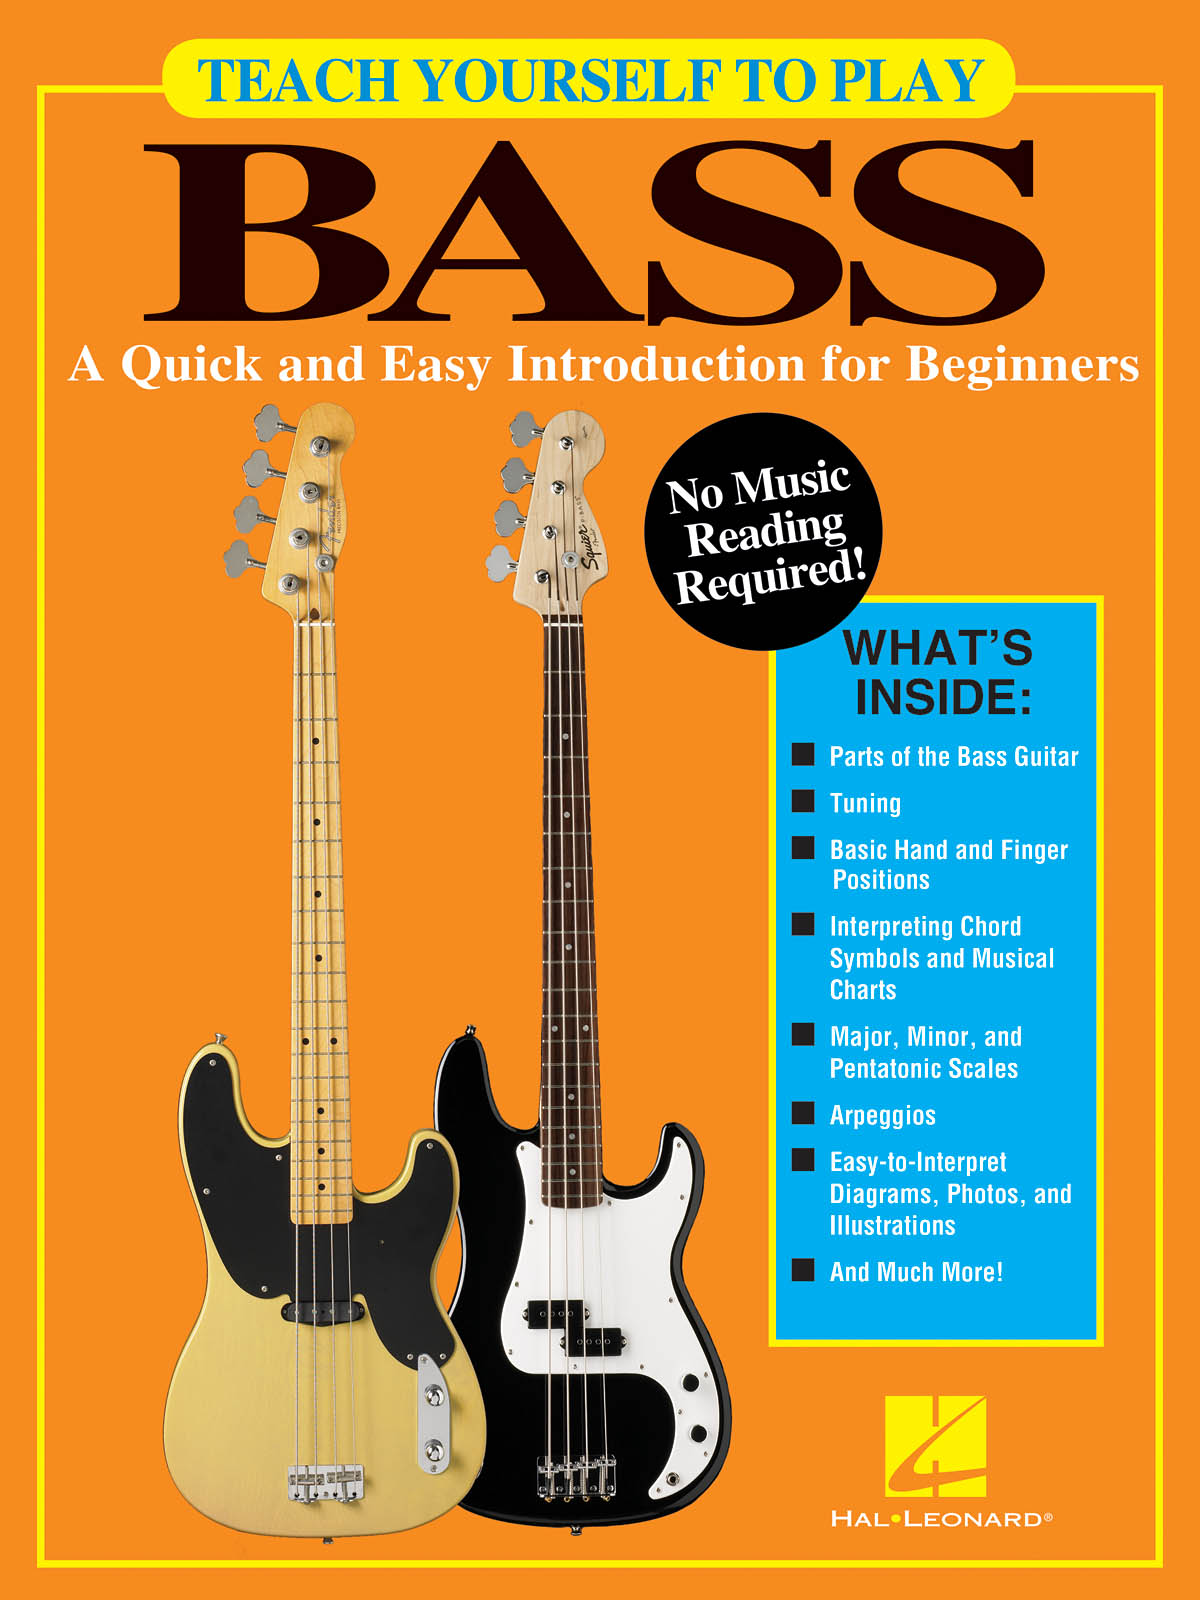 Teach Yourself to Play Bass - A Quick and Easy Introduction for Beginners - pro basovou kytaru